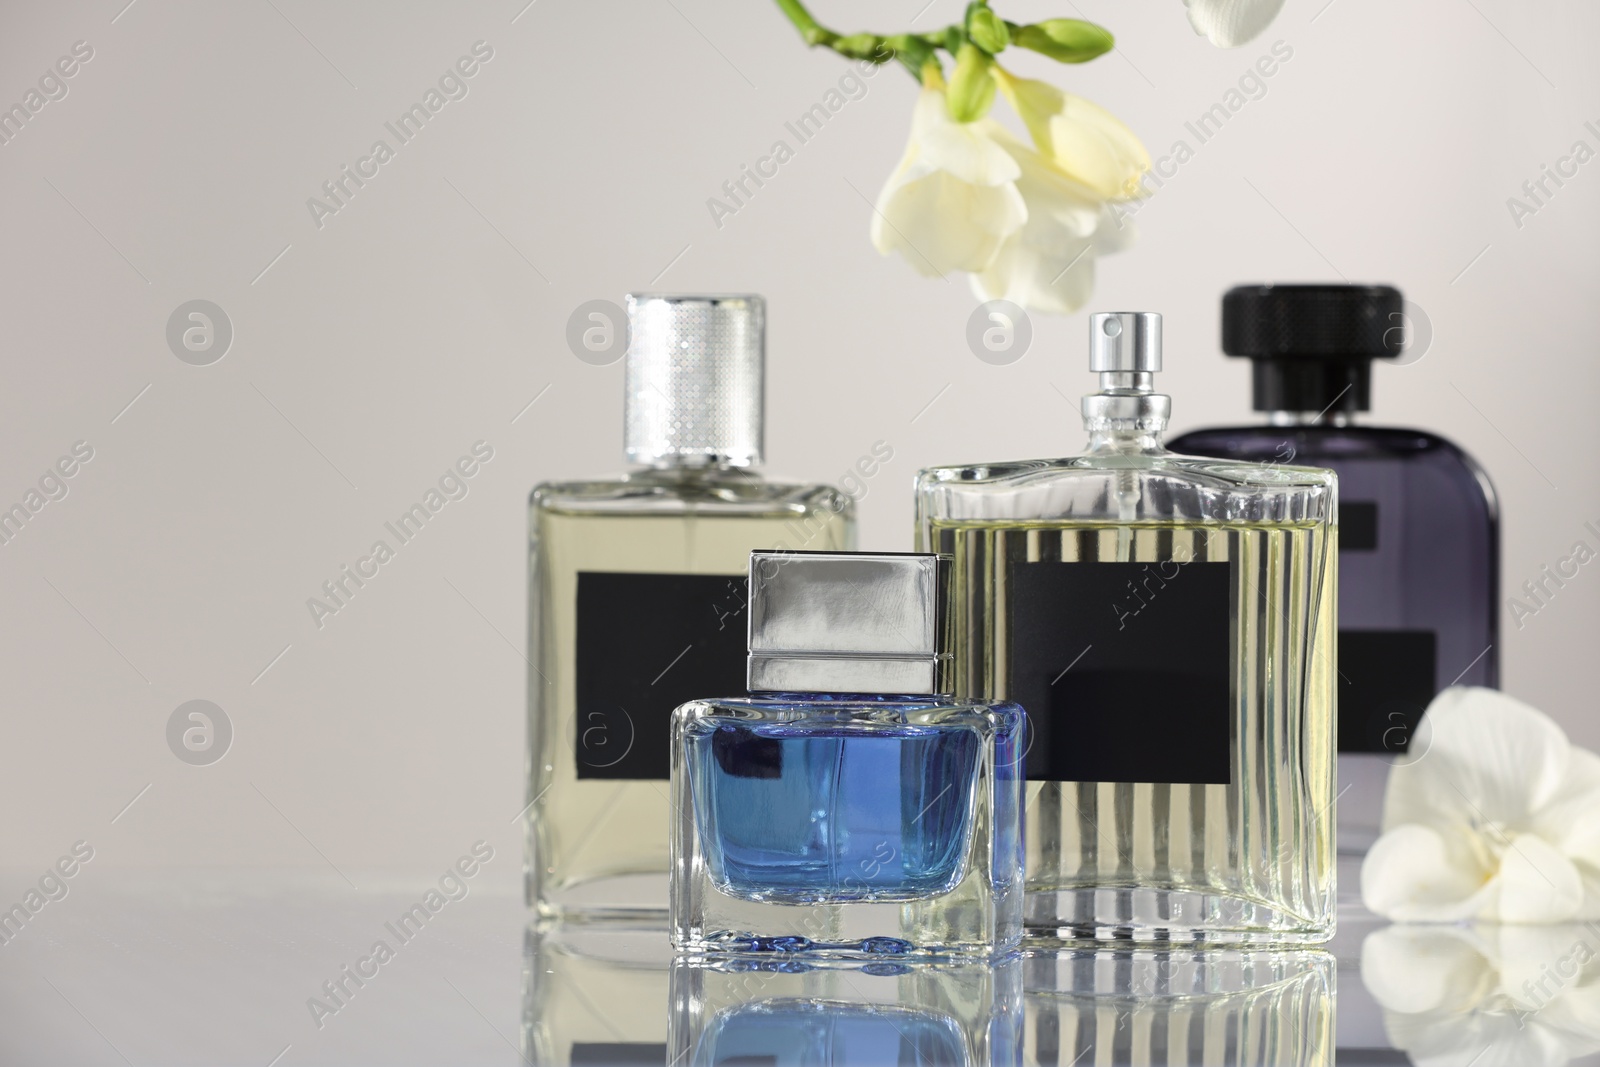 Photo of Luxury perfumes and freesia flowers on mirror surface against light grey background, space for text. Floral fragrance